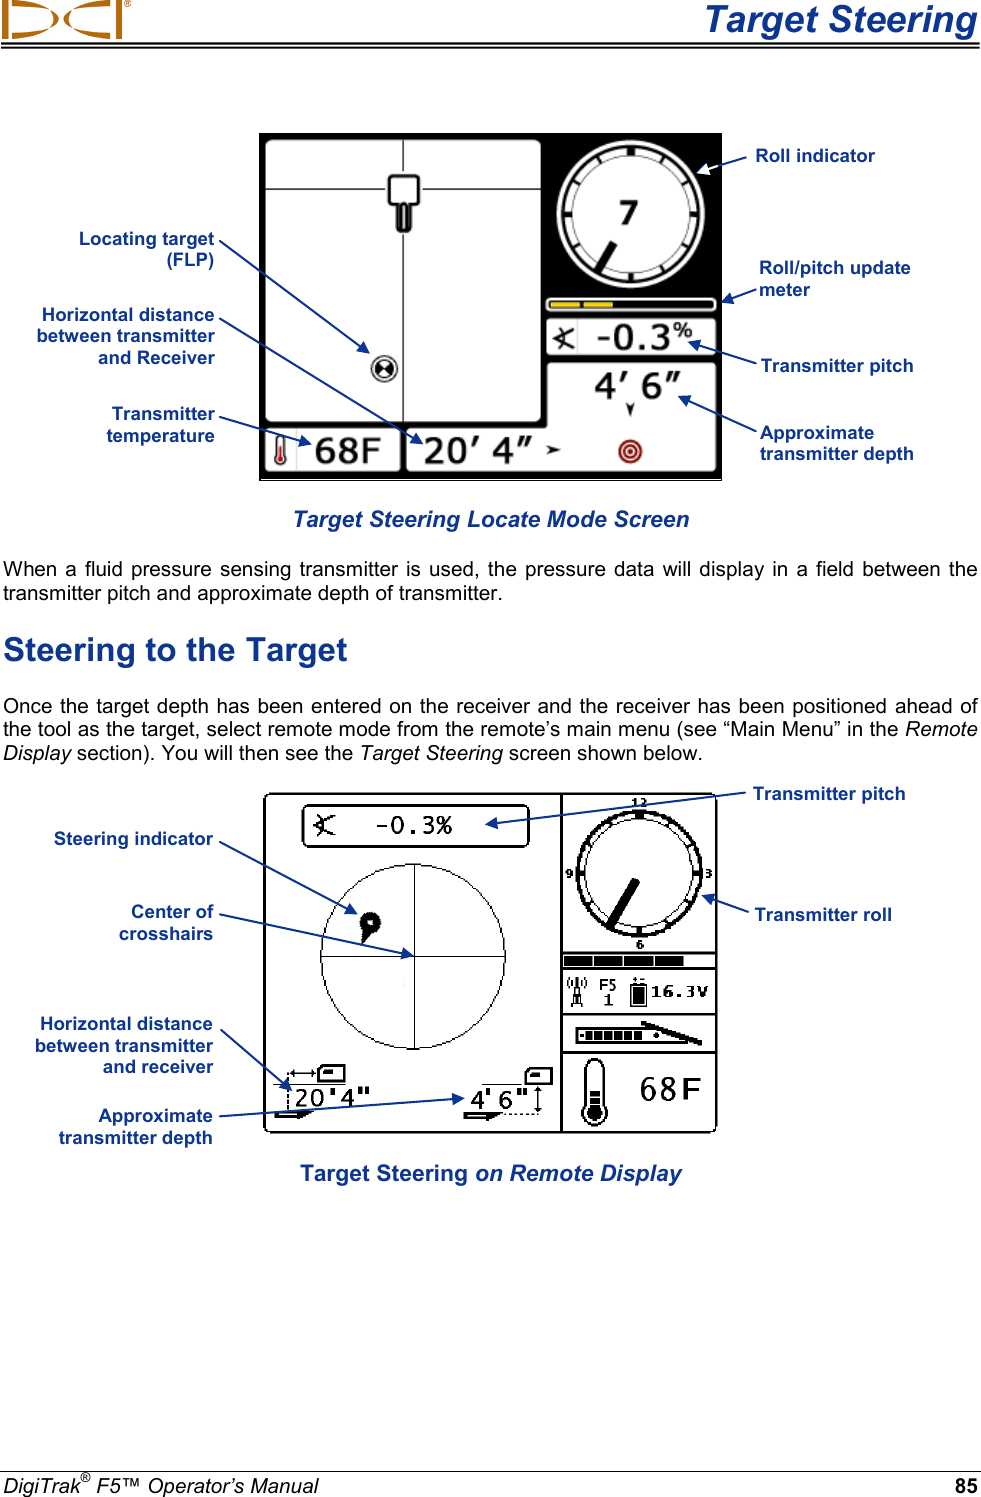  Target Steering DigiTrak® F5™ Operator’s Manual 85  Target Steering Locate Mode Screen When a fluid  pressure sensing transmitter is used, the pressure data will display in a field between the transmitter pitch and approximate depth of transmitter.  Steering to the Target Once the target depth has been entered on the receiver and the receiver has been positioned ahead of the tool as the target, select remote mode from the remote’s main menu (see “Main Menu” in the Remote Display section). You will then see the Target Steering screen shown below.   Target Steering on Remote Display Horizontal distance between transmitter and receiver  Approximate transmitter depth  Transmitter roll  Transmitter pitch Horizontal distance between transmitter and Receiver  Transmitter temperature  Approximate transmitter depth Transmitter pitch Locating target (FLP) Roll/pitch update meter Roll indicator Steering indicator  Center of  crosshairs 